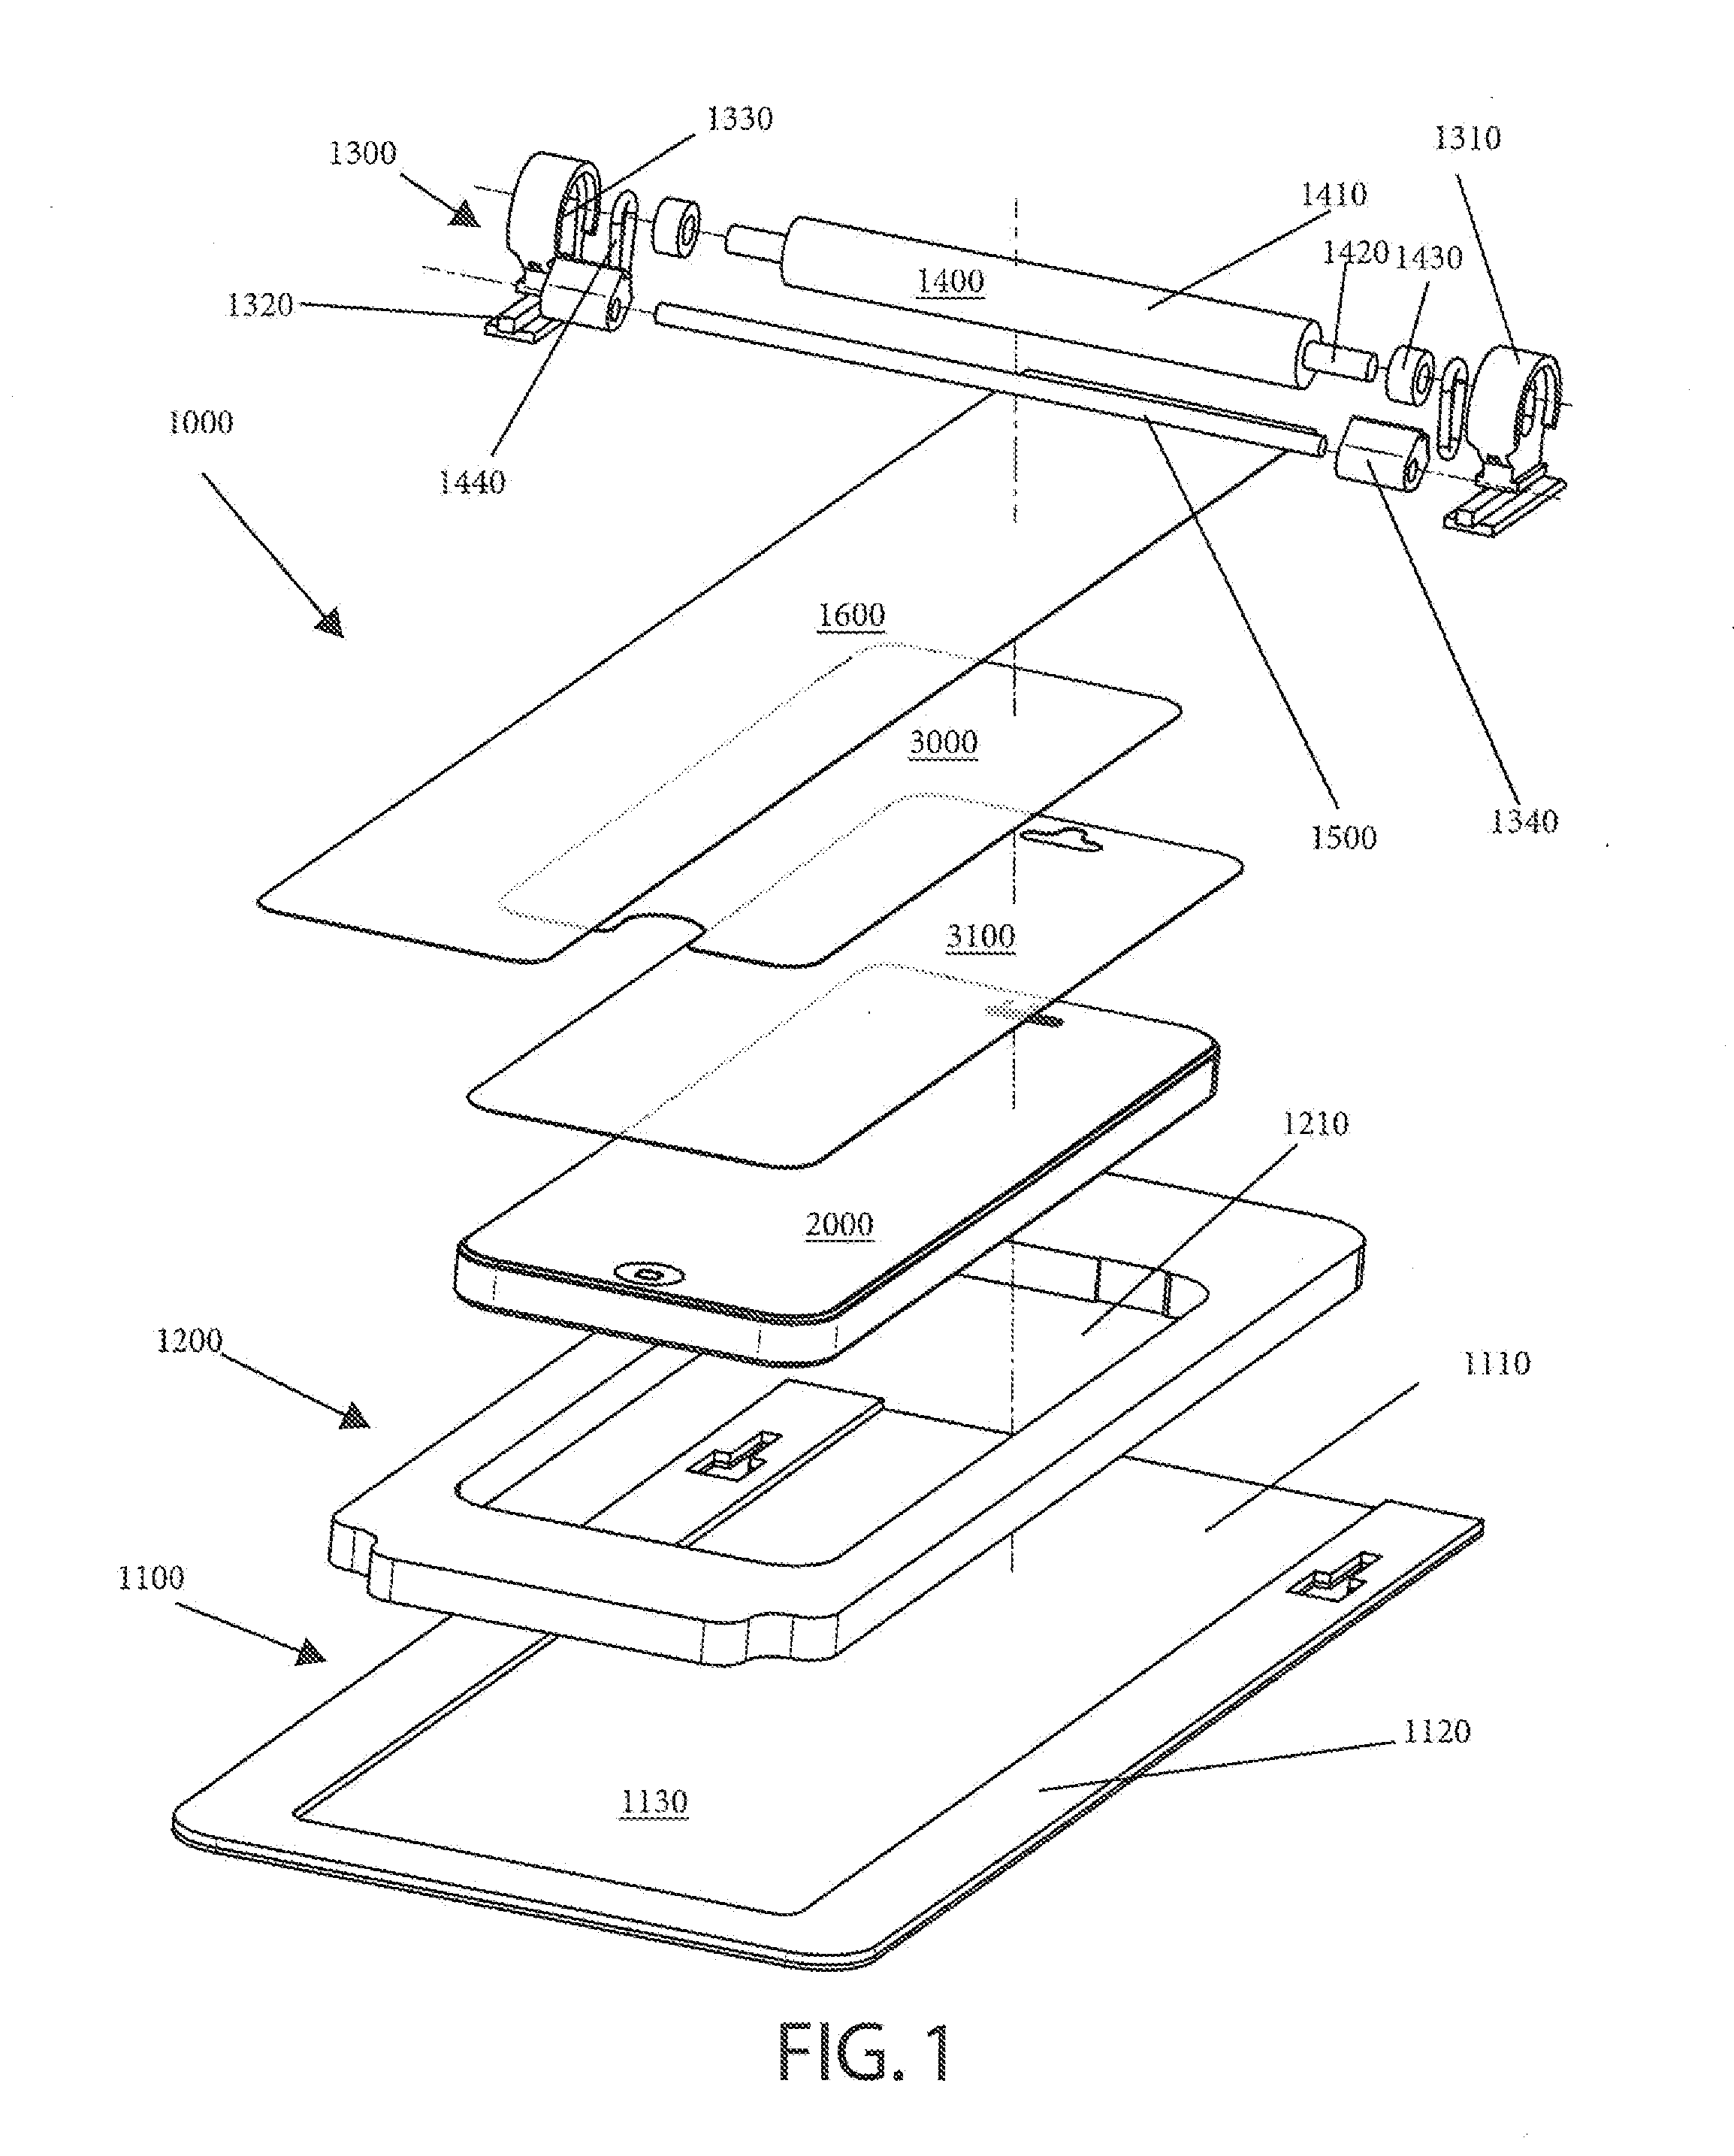 Apparatus for the alignment and application of a protective film to a device, and related methods